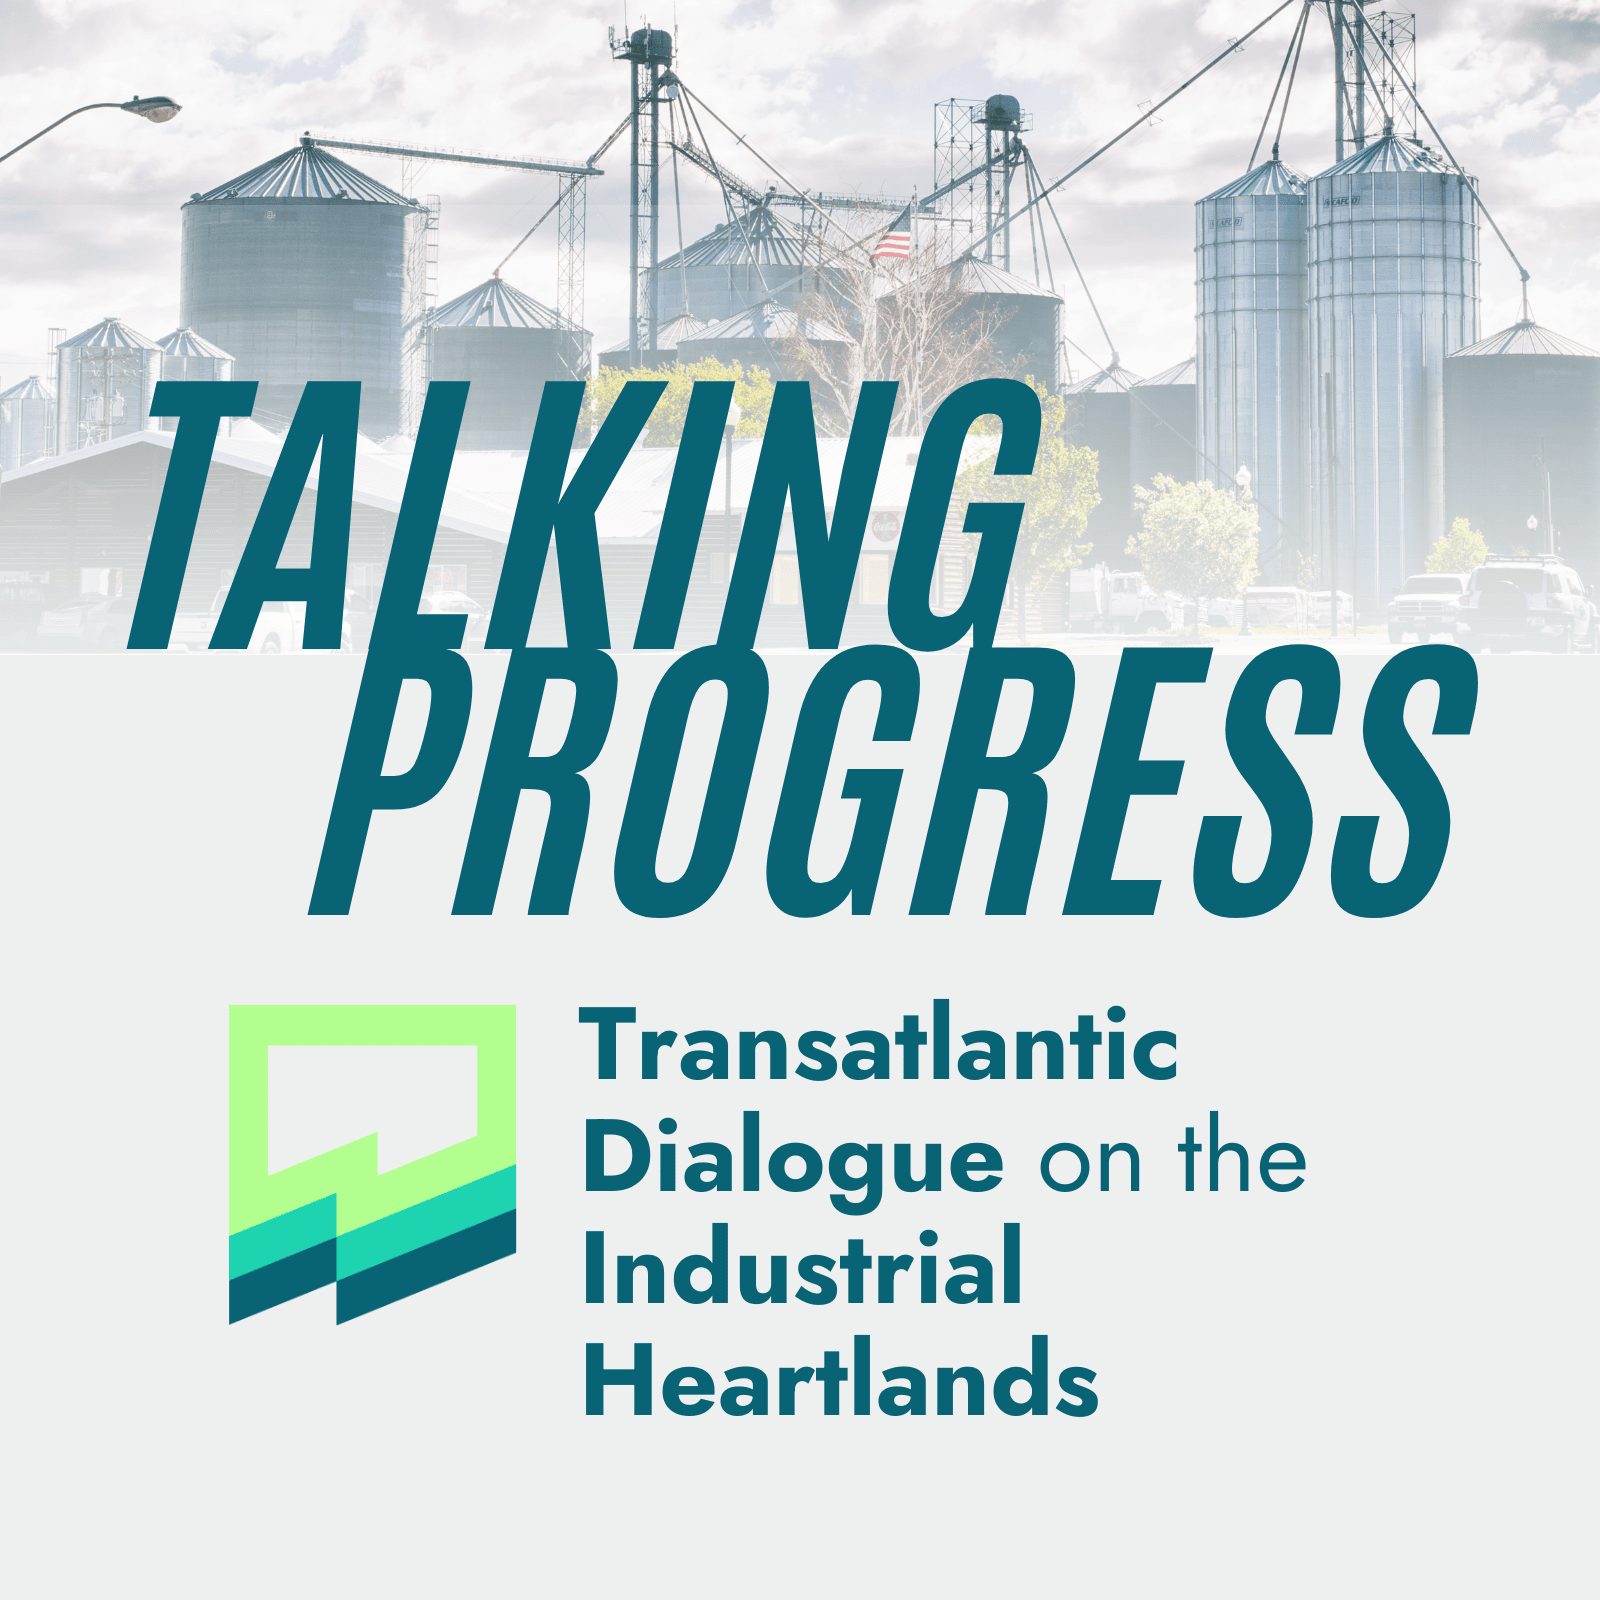 Industrial Heartlands: The democratic imperative to deliver for the heartlands